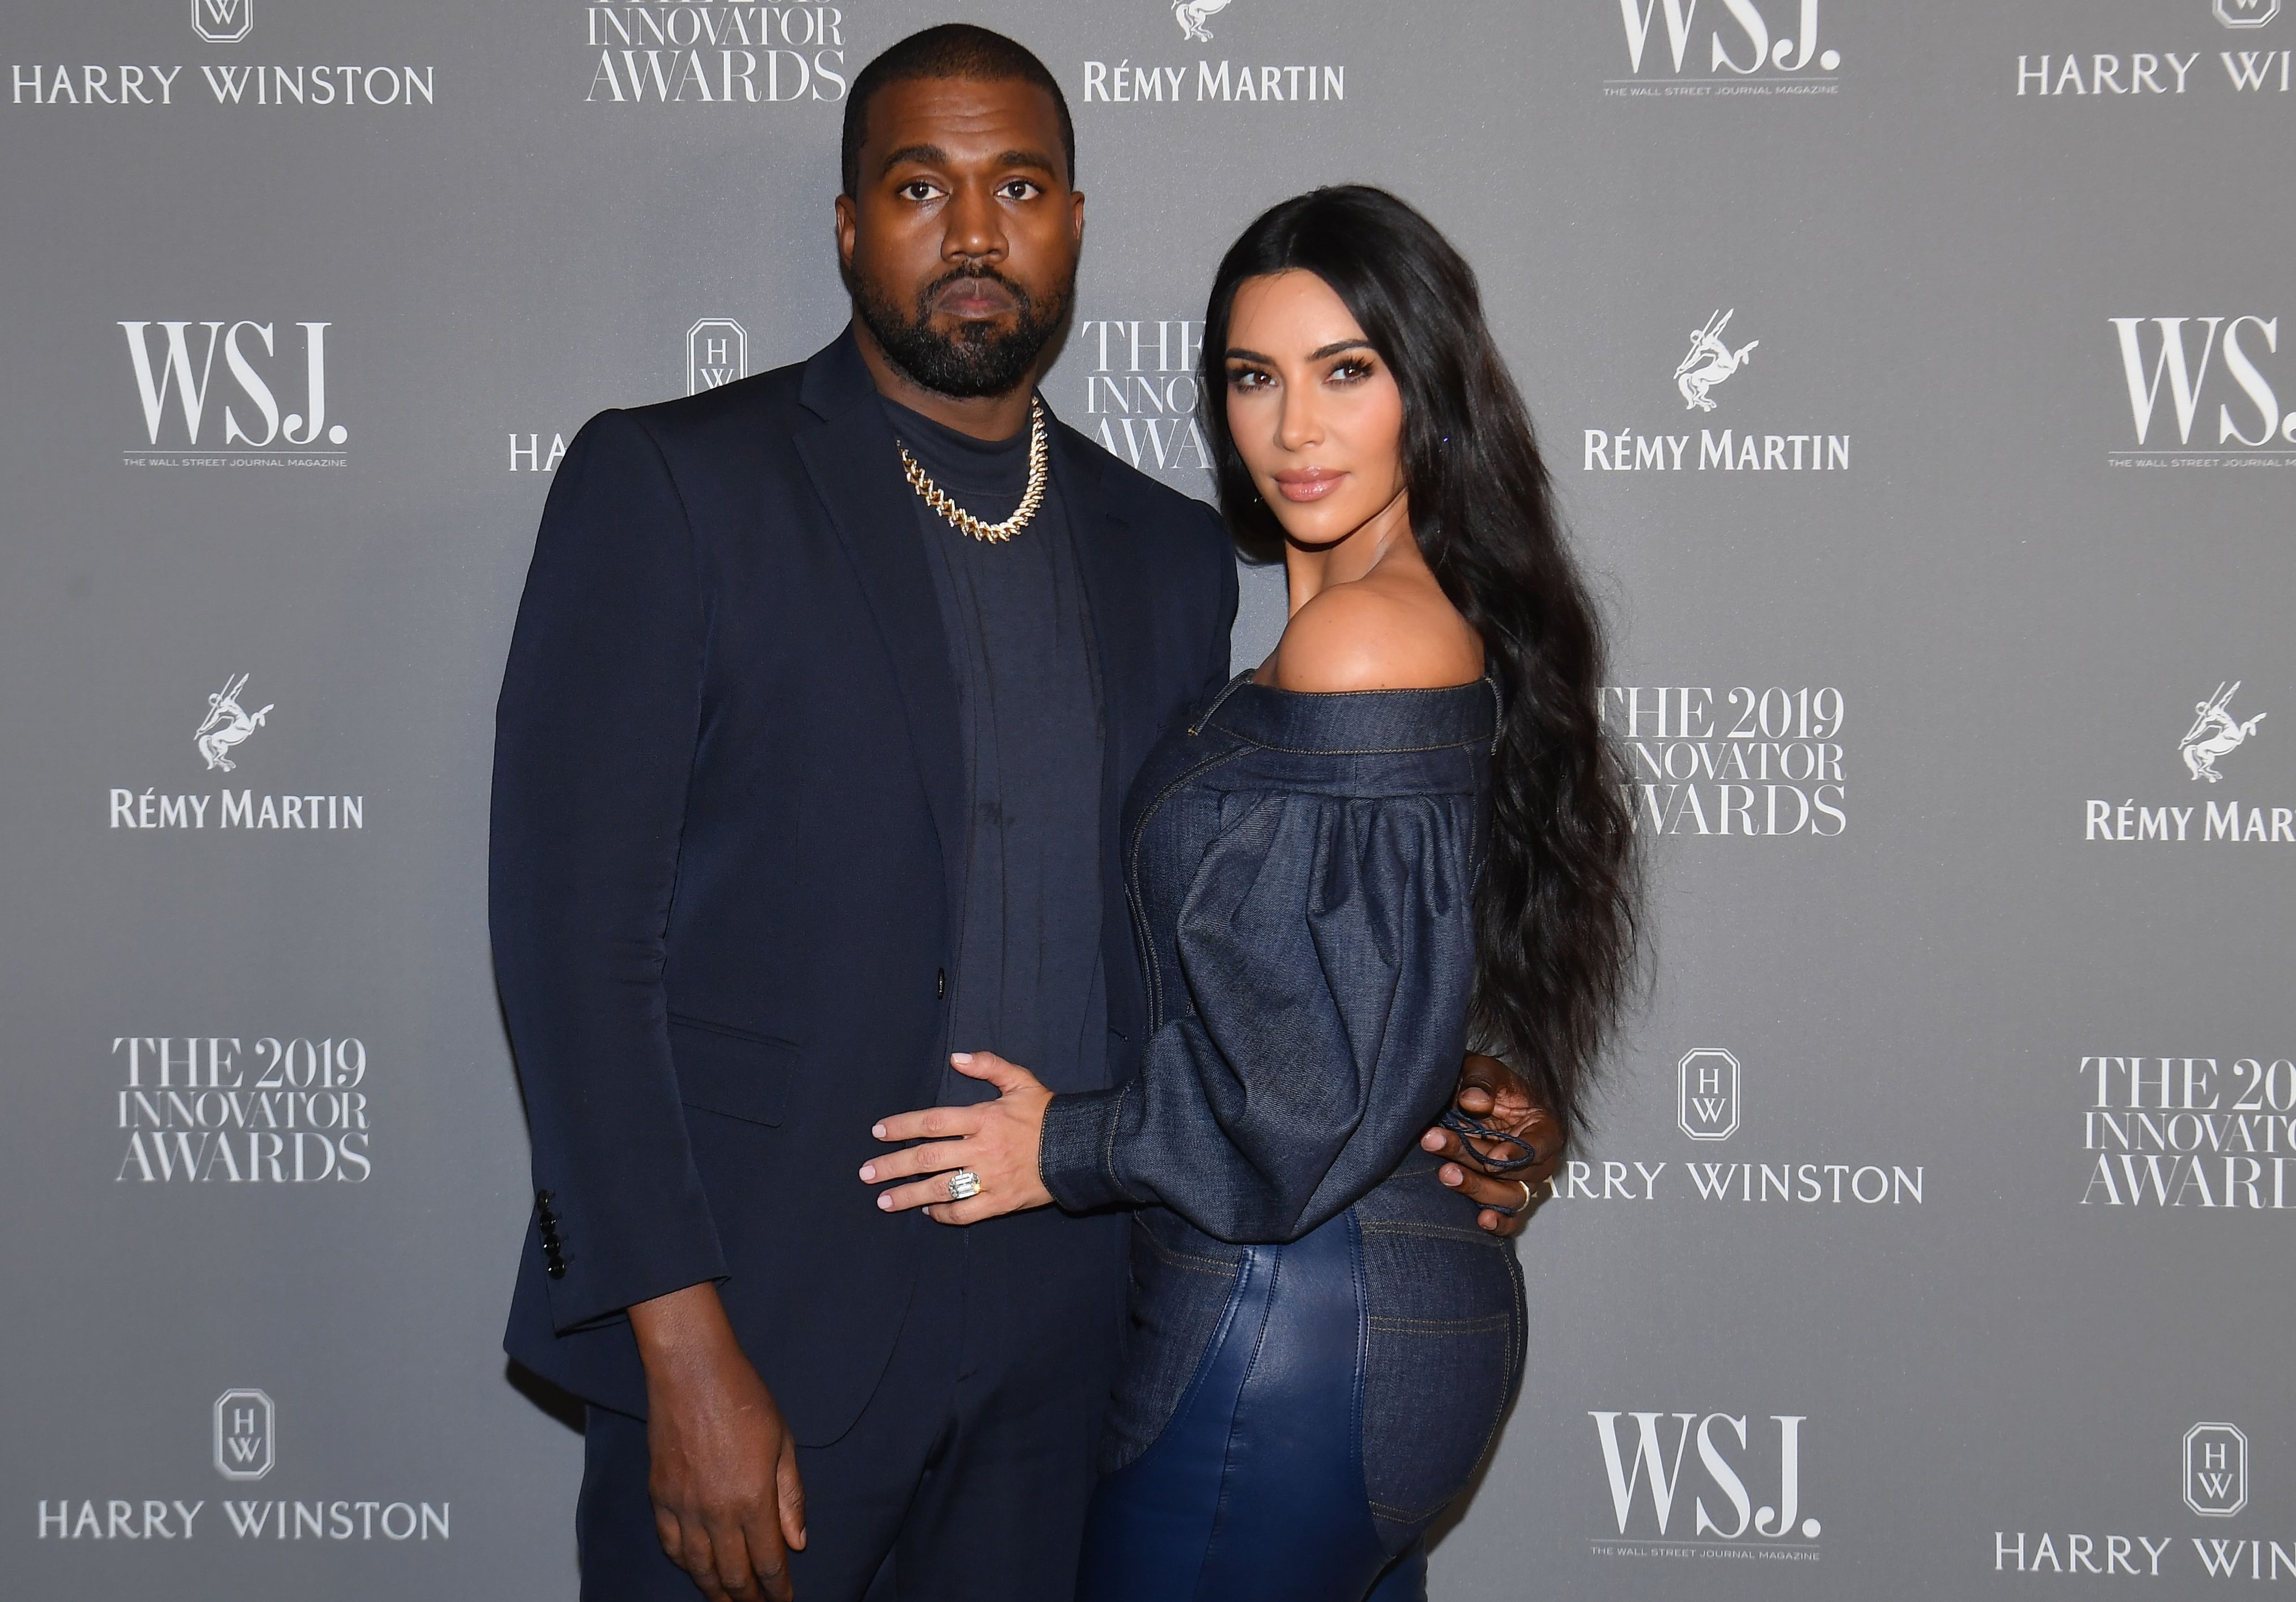 Kim Kardashian twins with hubby Kanye West in pairs of